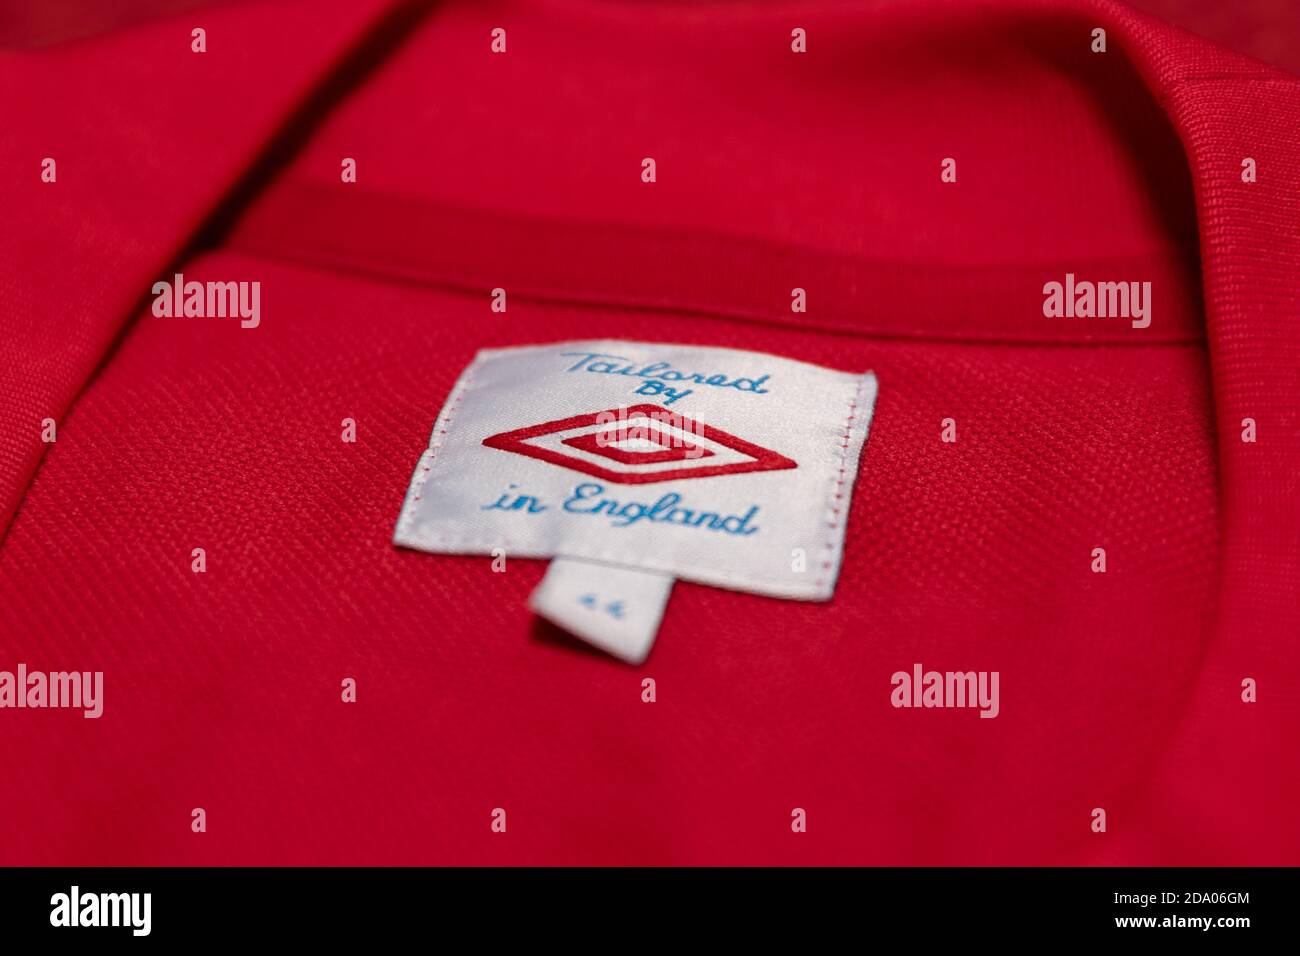 Tailored By Umbro in England label in the back of a red England Football  Shirt Stock Photo - Alamy